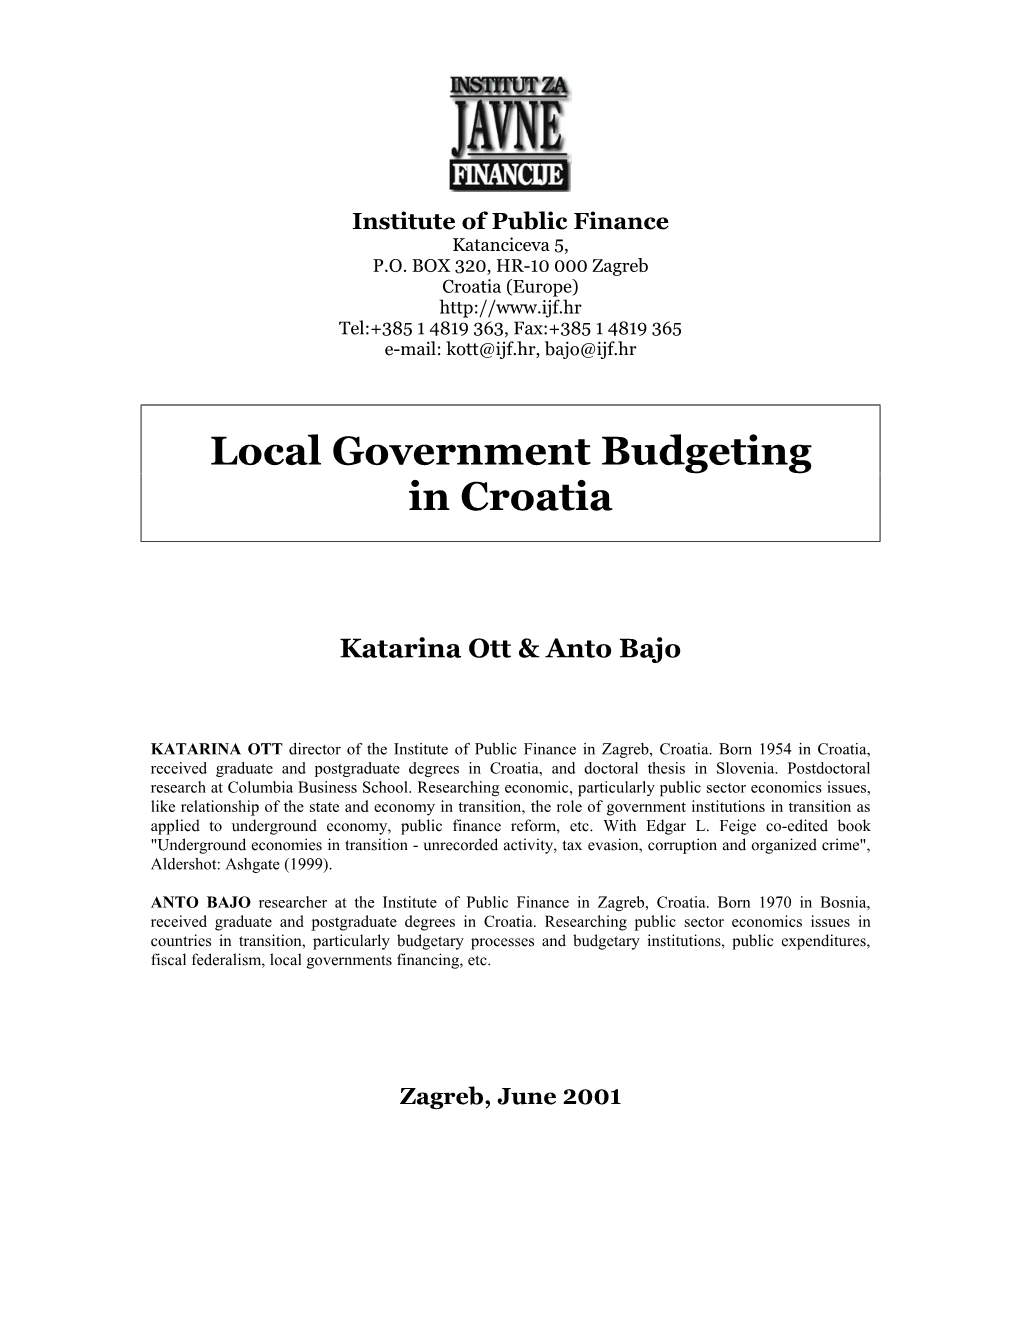 Local Government Budgeting in Croatia